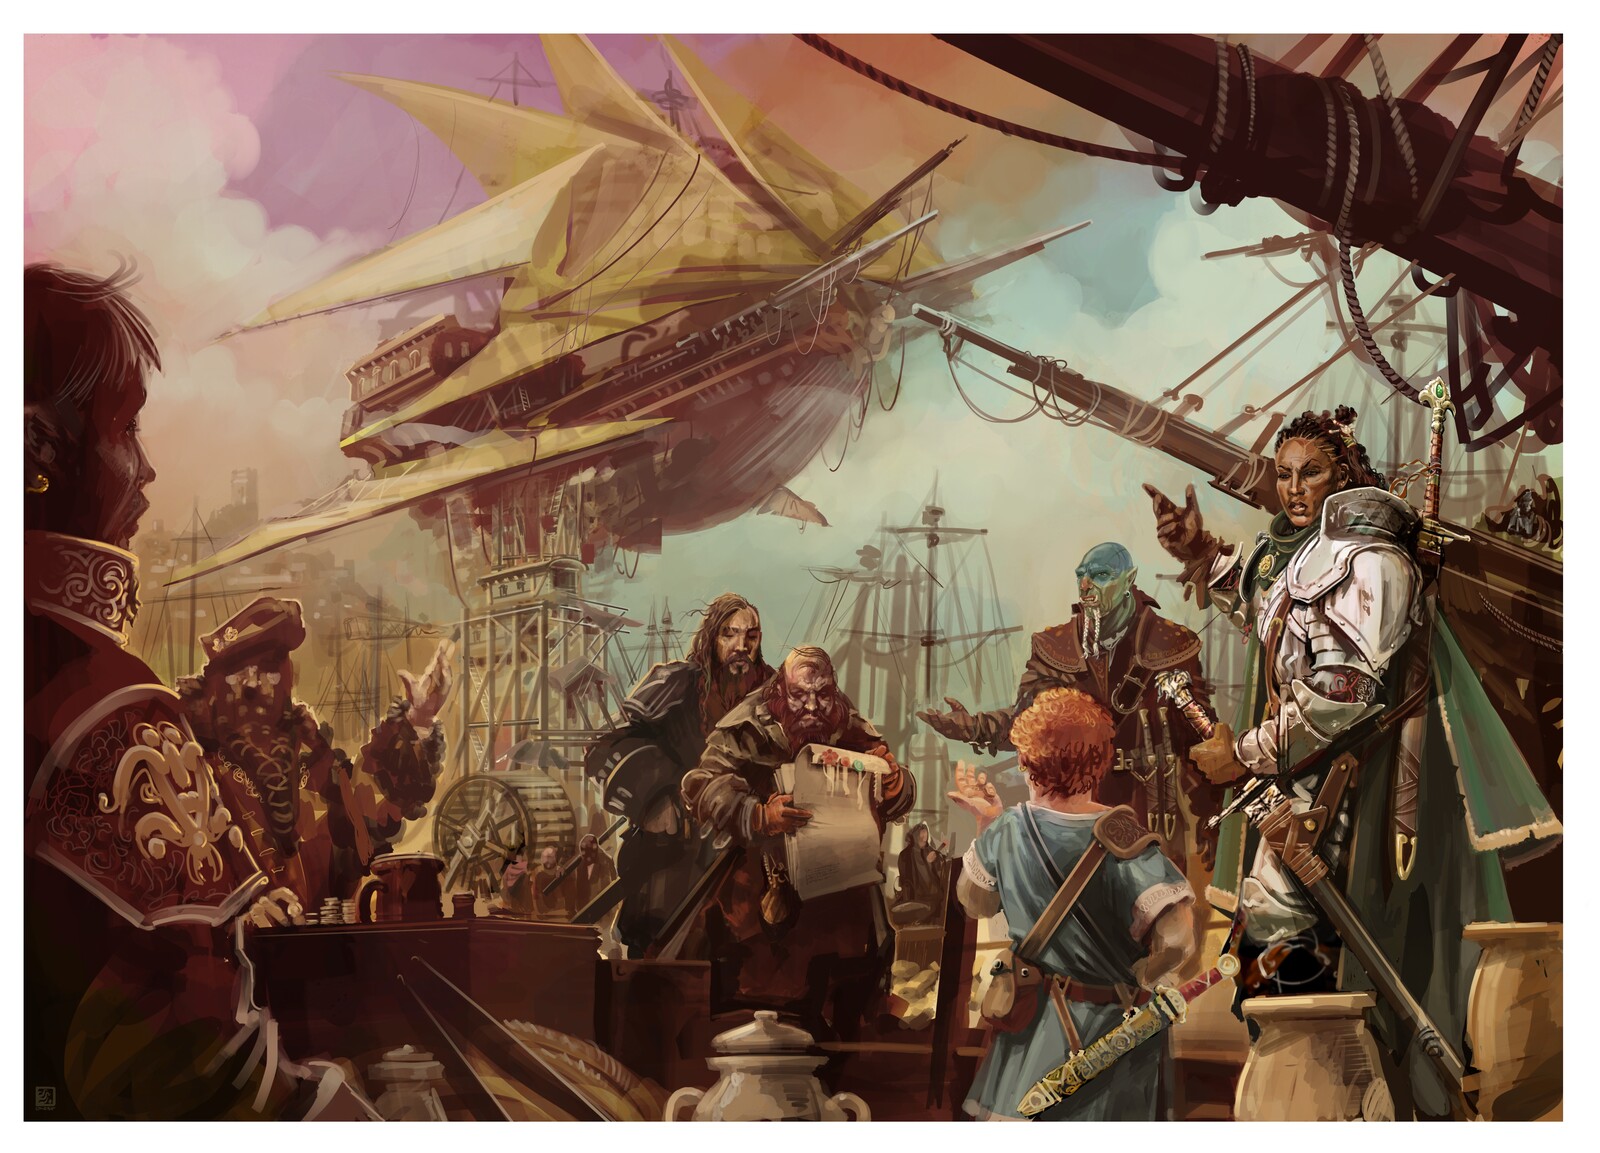 Here a group of adventurers seem to to have been gifted the documents that prove the own a ship, only they might have got a little more than they bargained for.